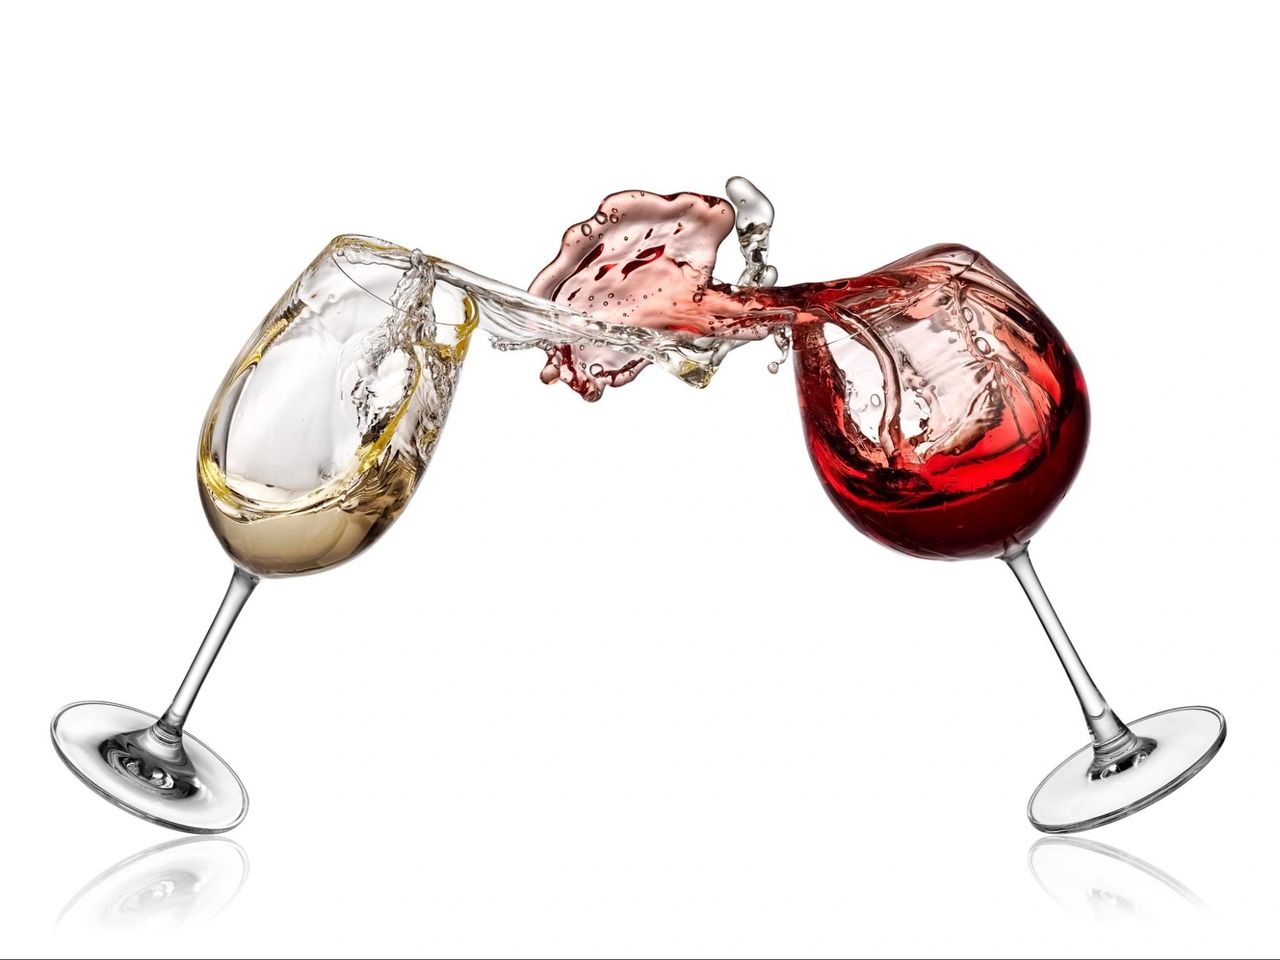 What is the Difference Between Red and White Wine Glasses